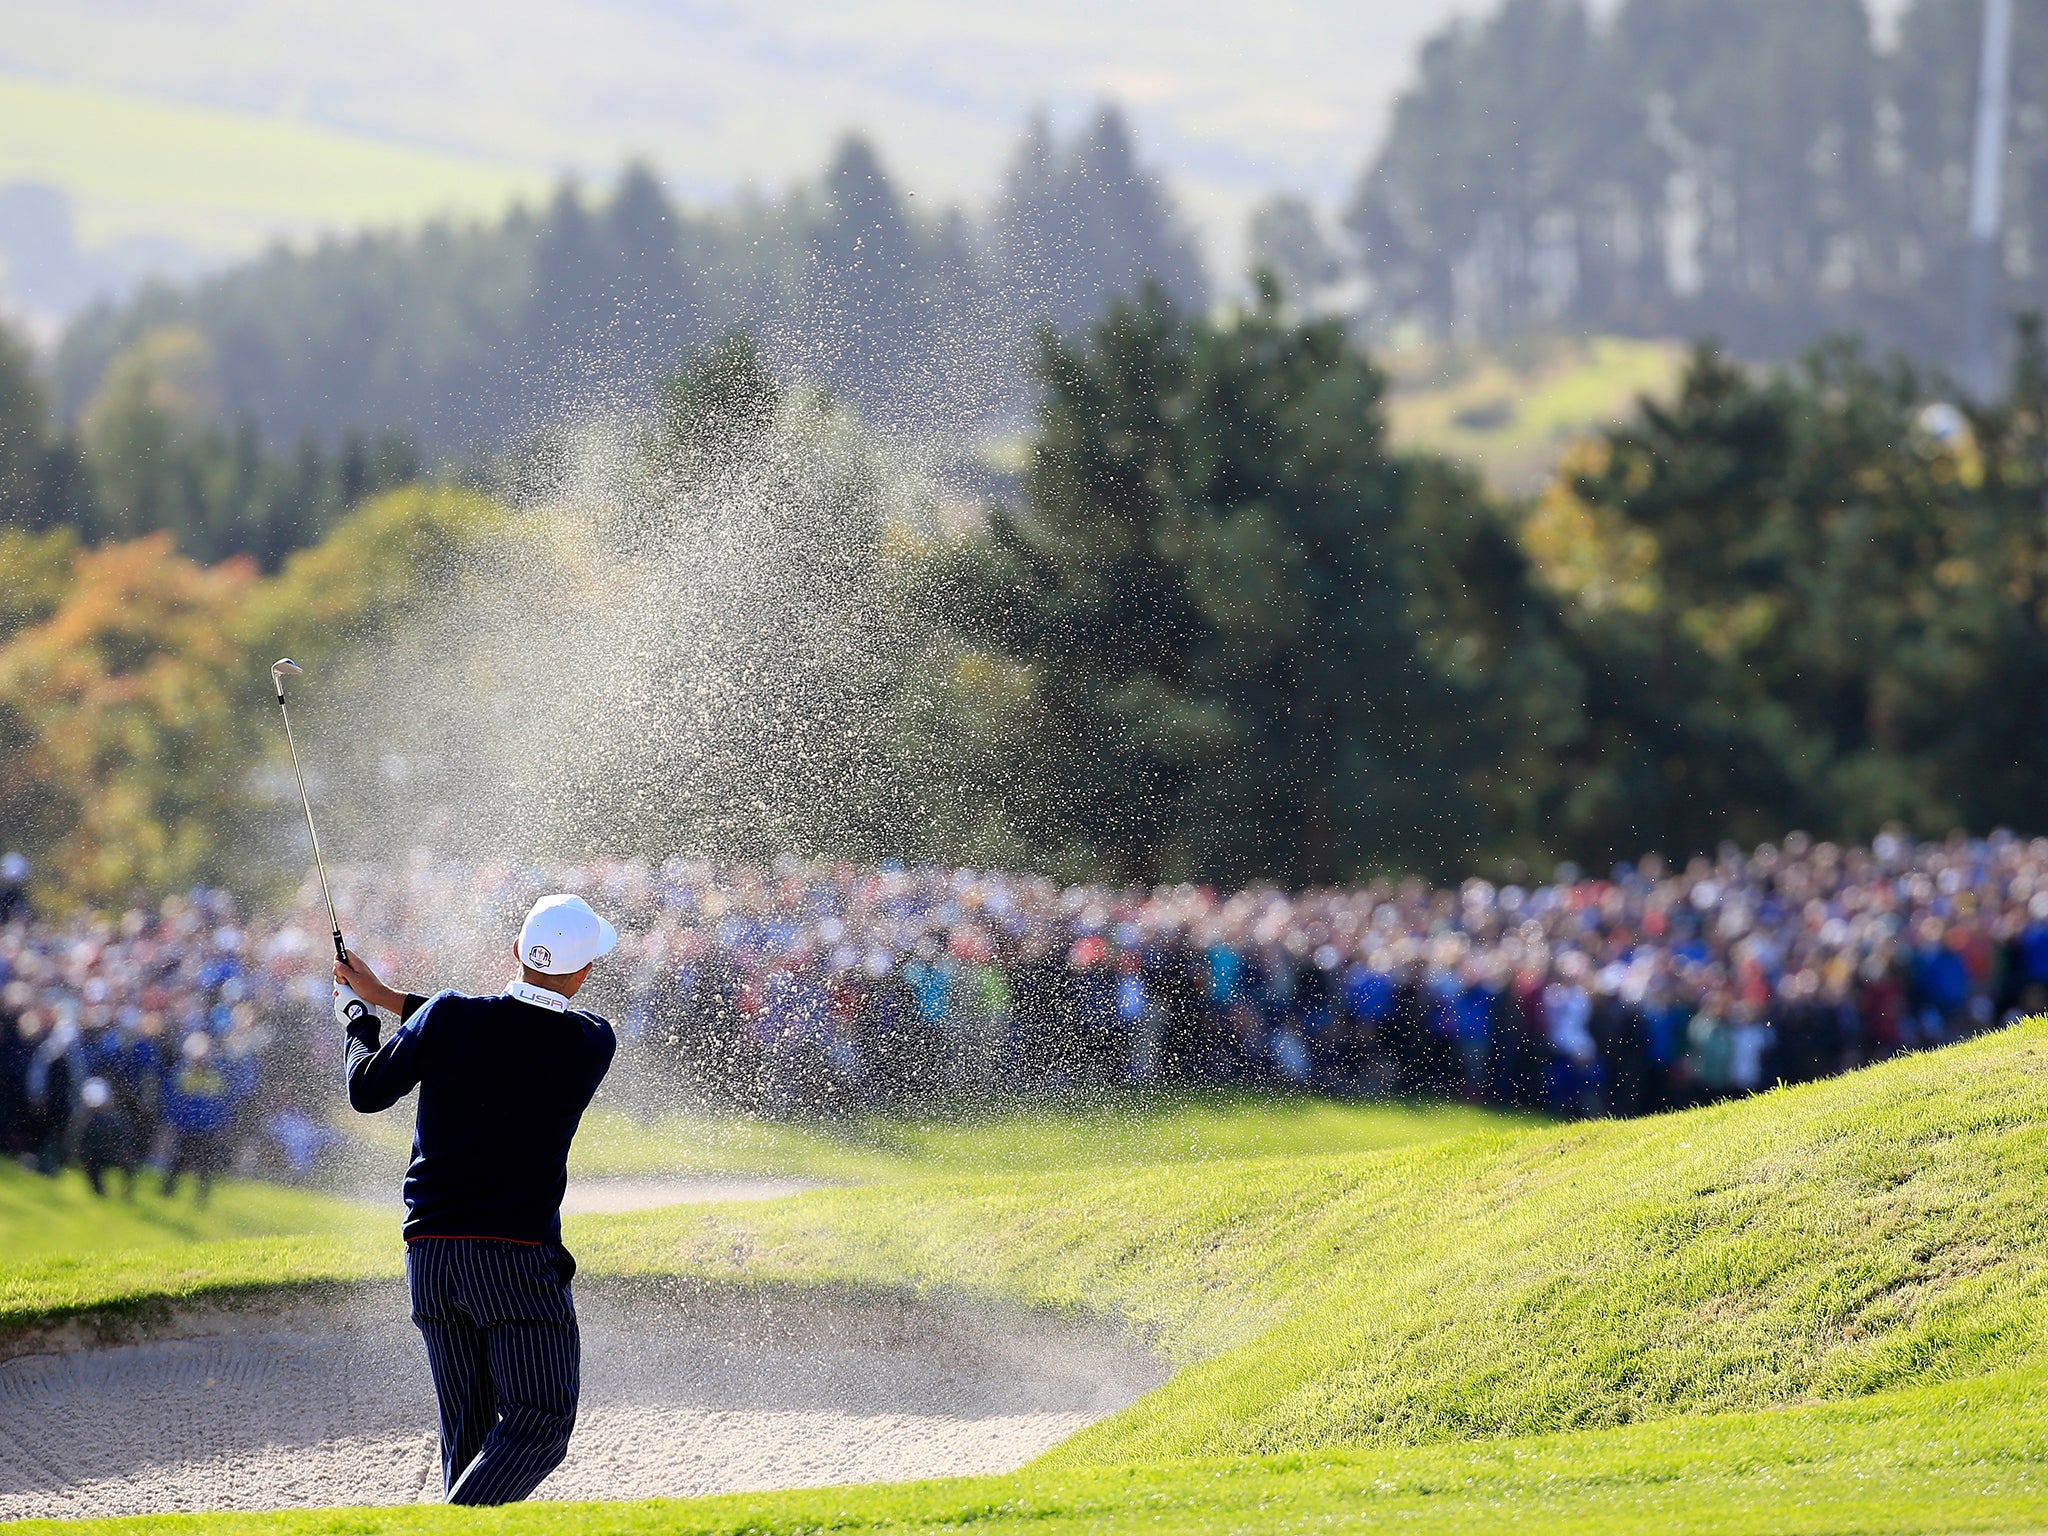 Rickie Fowler of the United States chips from the bunker on the 16th hole during the Morning Fourballs of the 2014 Ryder Cup on the PGA Centenary course at the Gleneagles Hotel in Auchterarder, Scotland